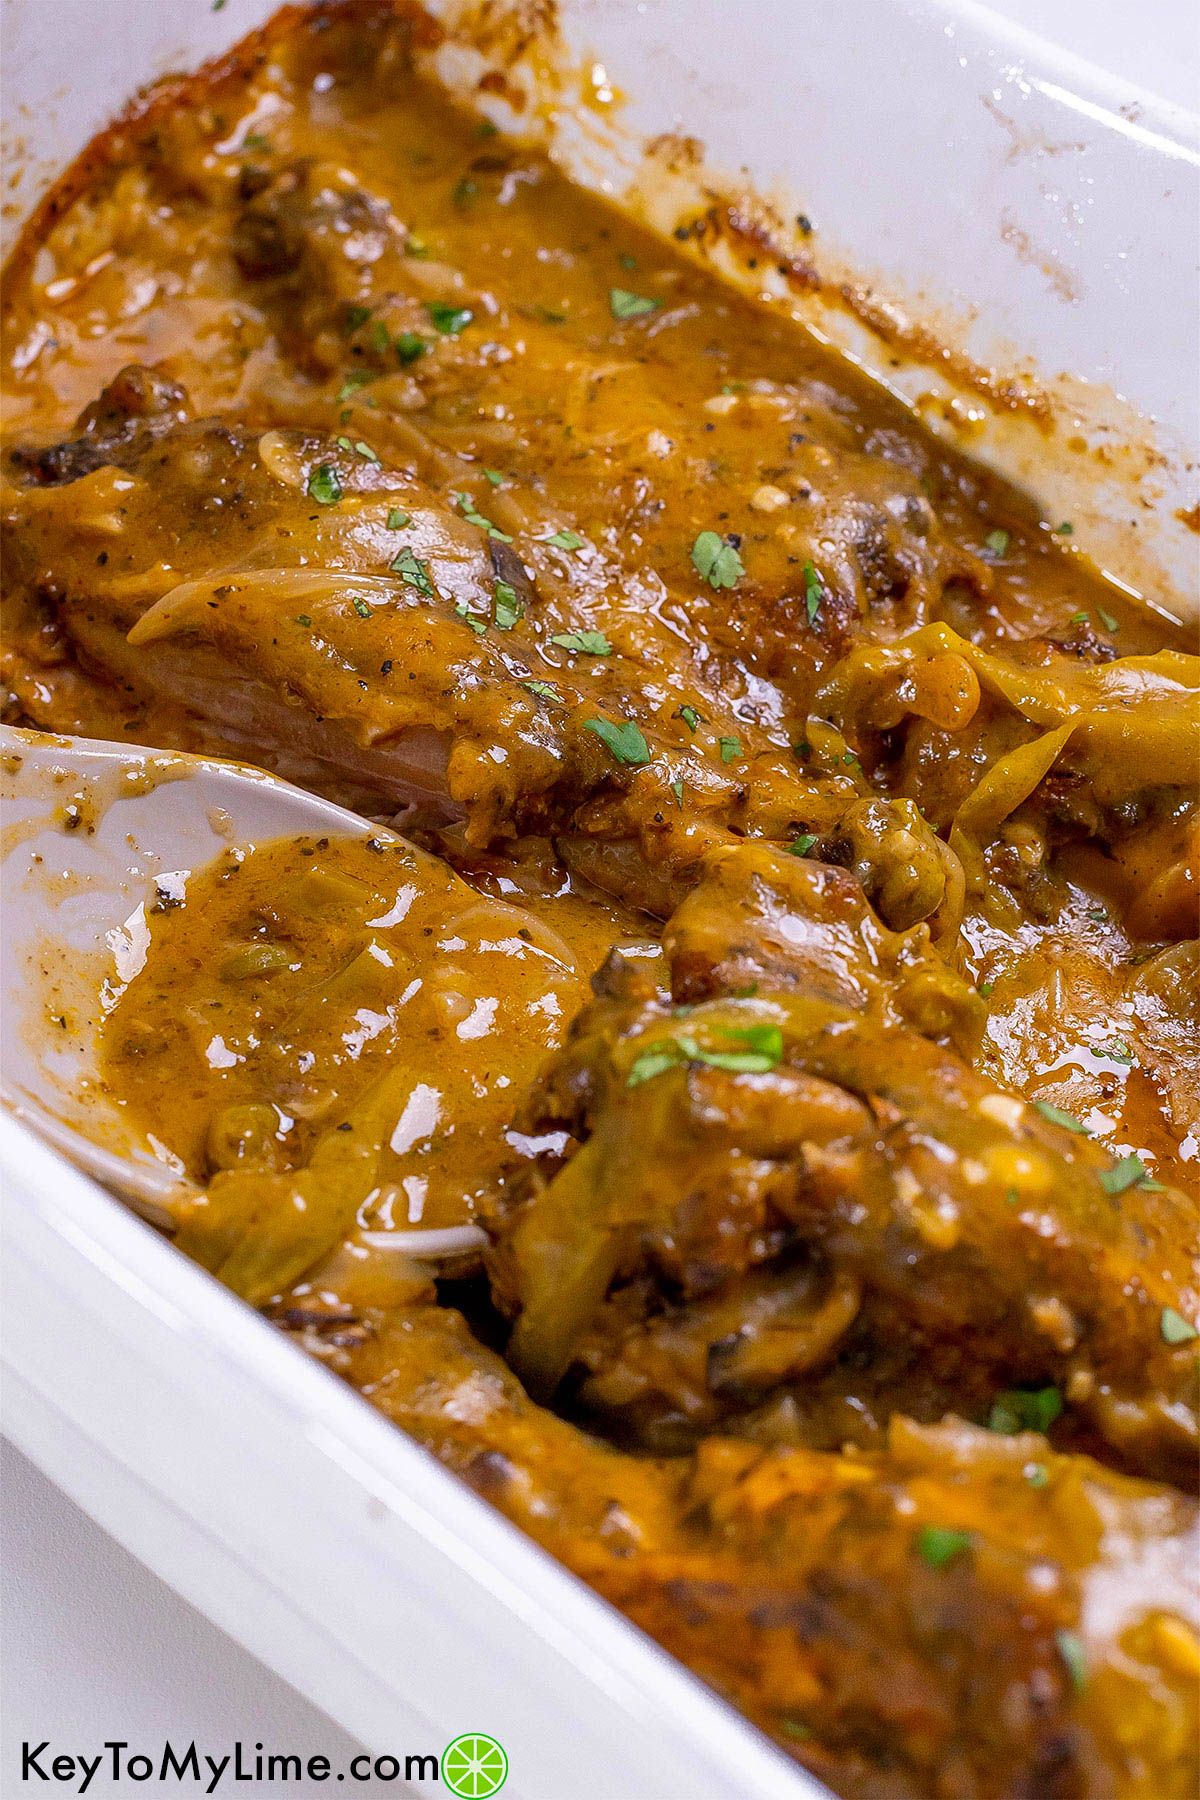 A close up image of a casserole dish with turkey wings and a serving spoon resting inside.